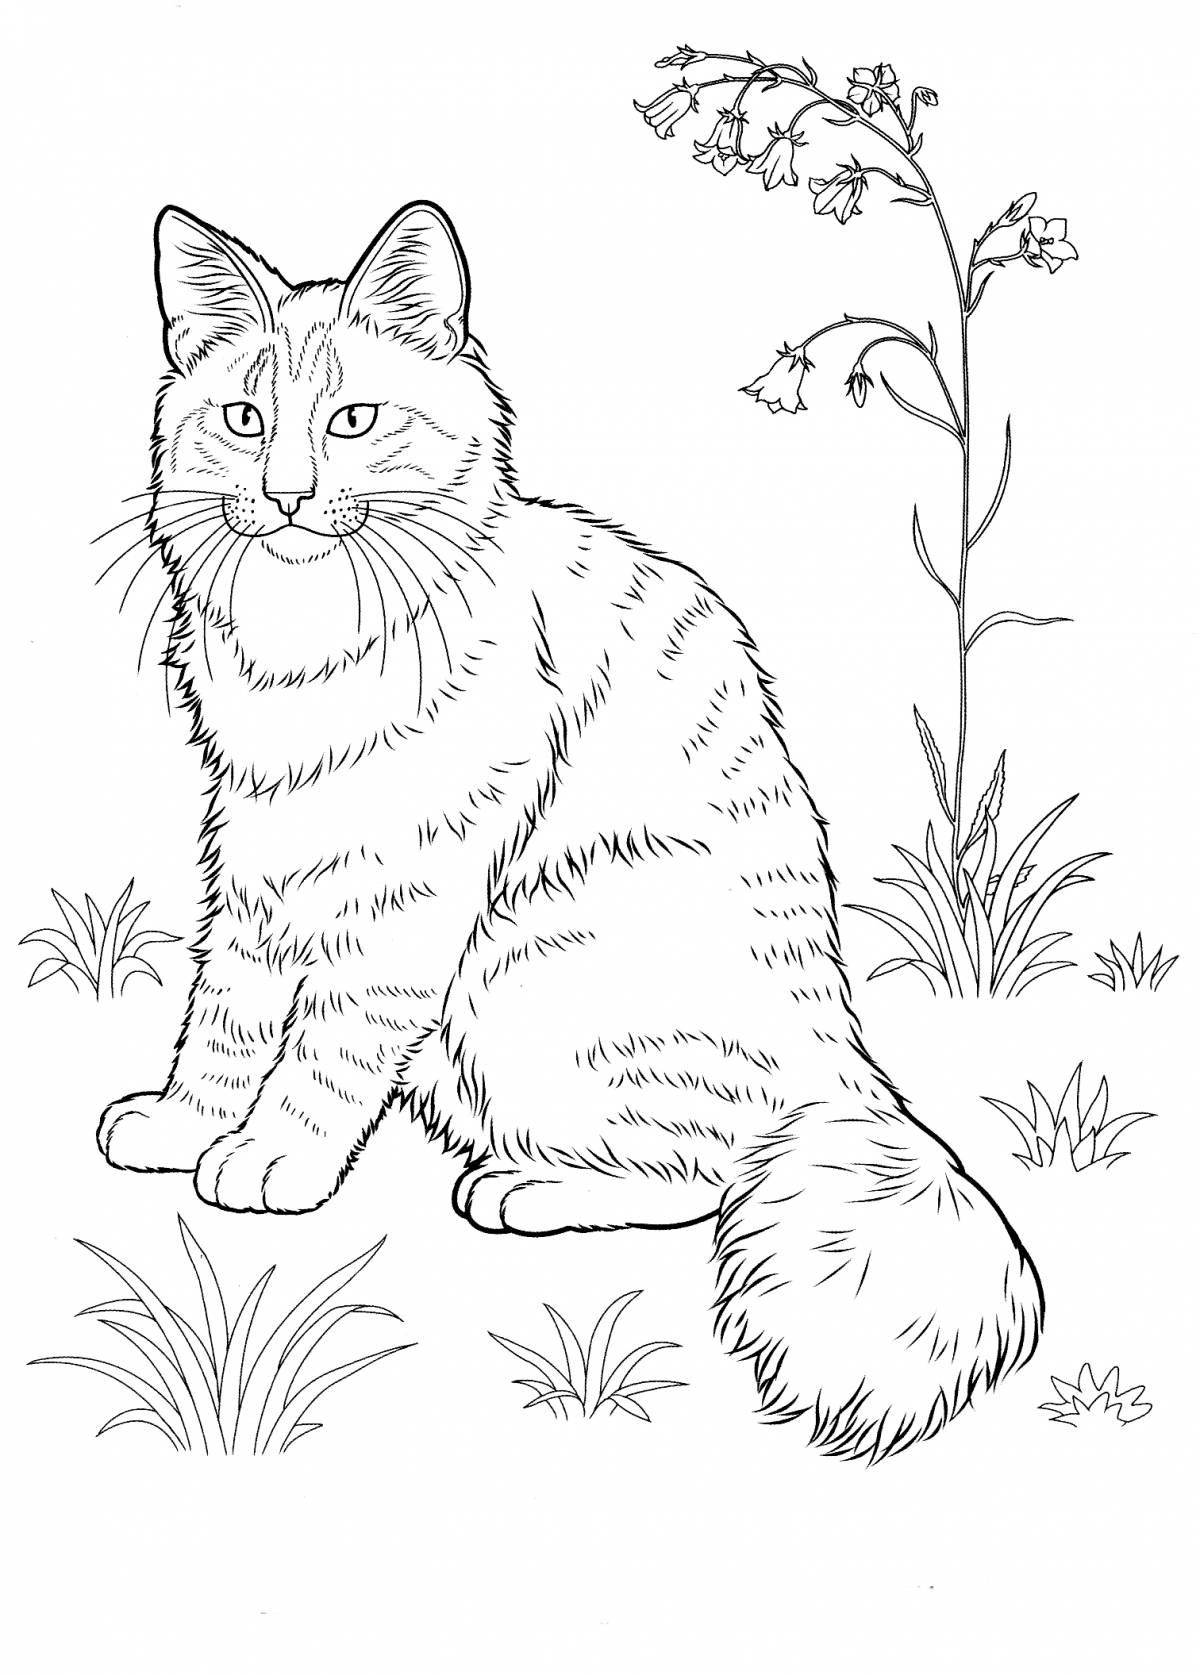 Cunning cat coloring page